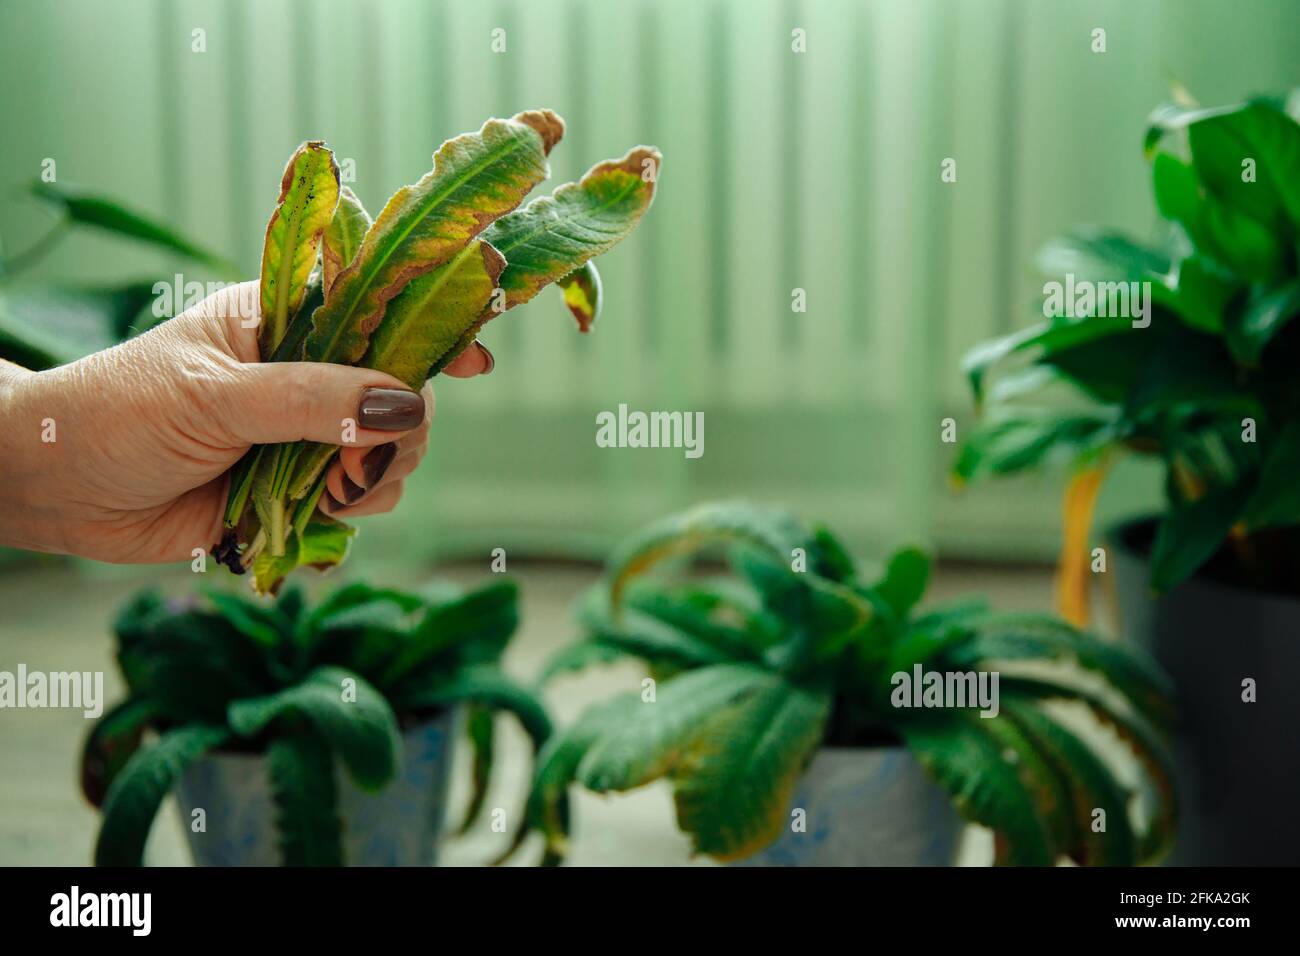 The hand holds the yellow deformed leaves of the indoor flower after pruning. Stock Photo